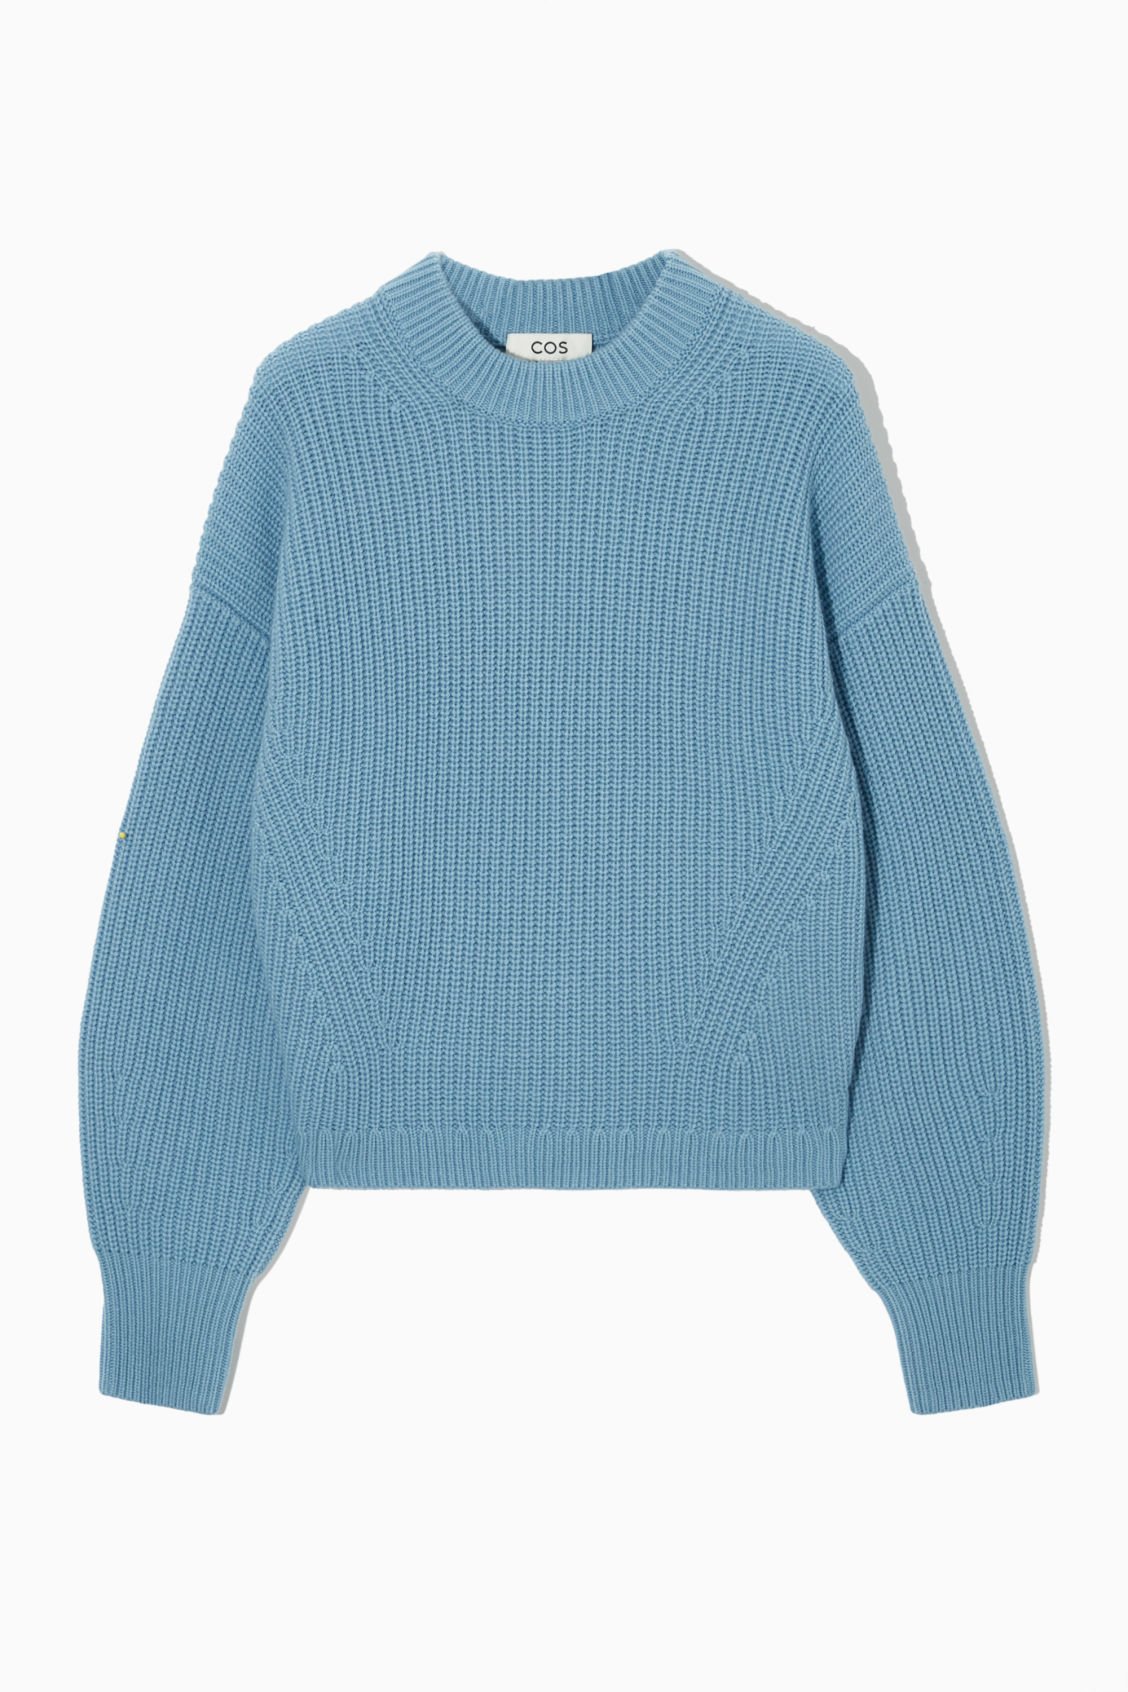 COS Pure Cashmere Ribbed-Knit Jumper - ShopStyle